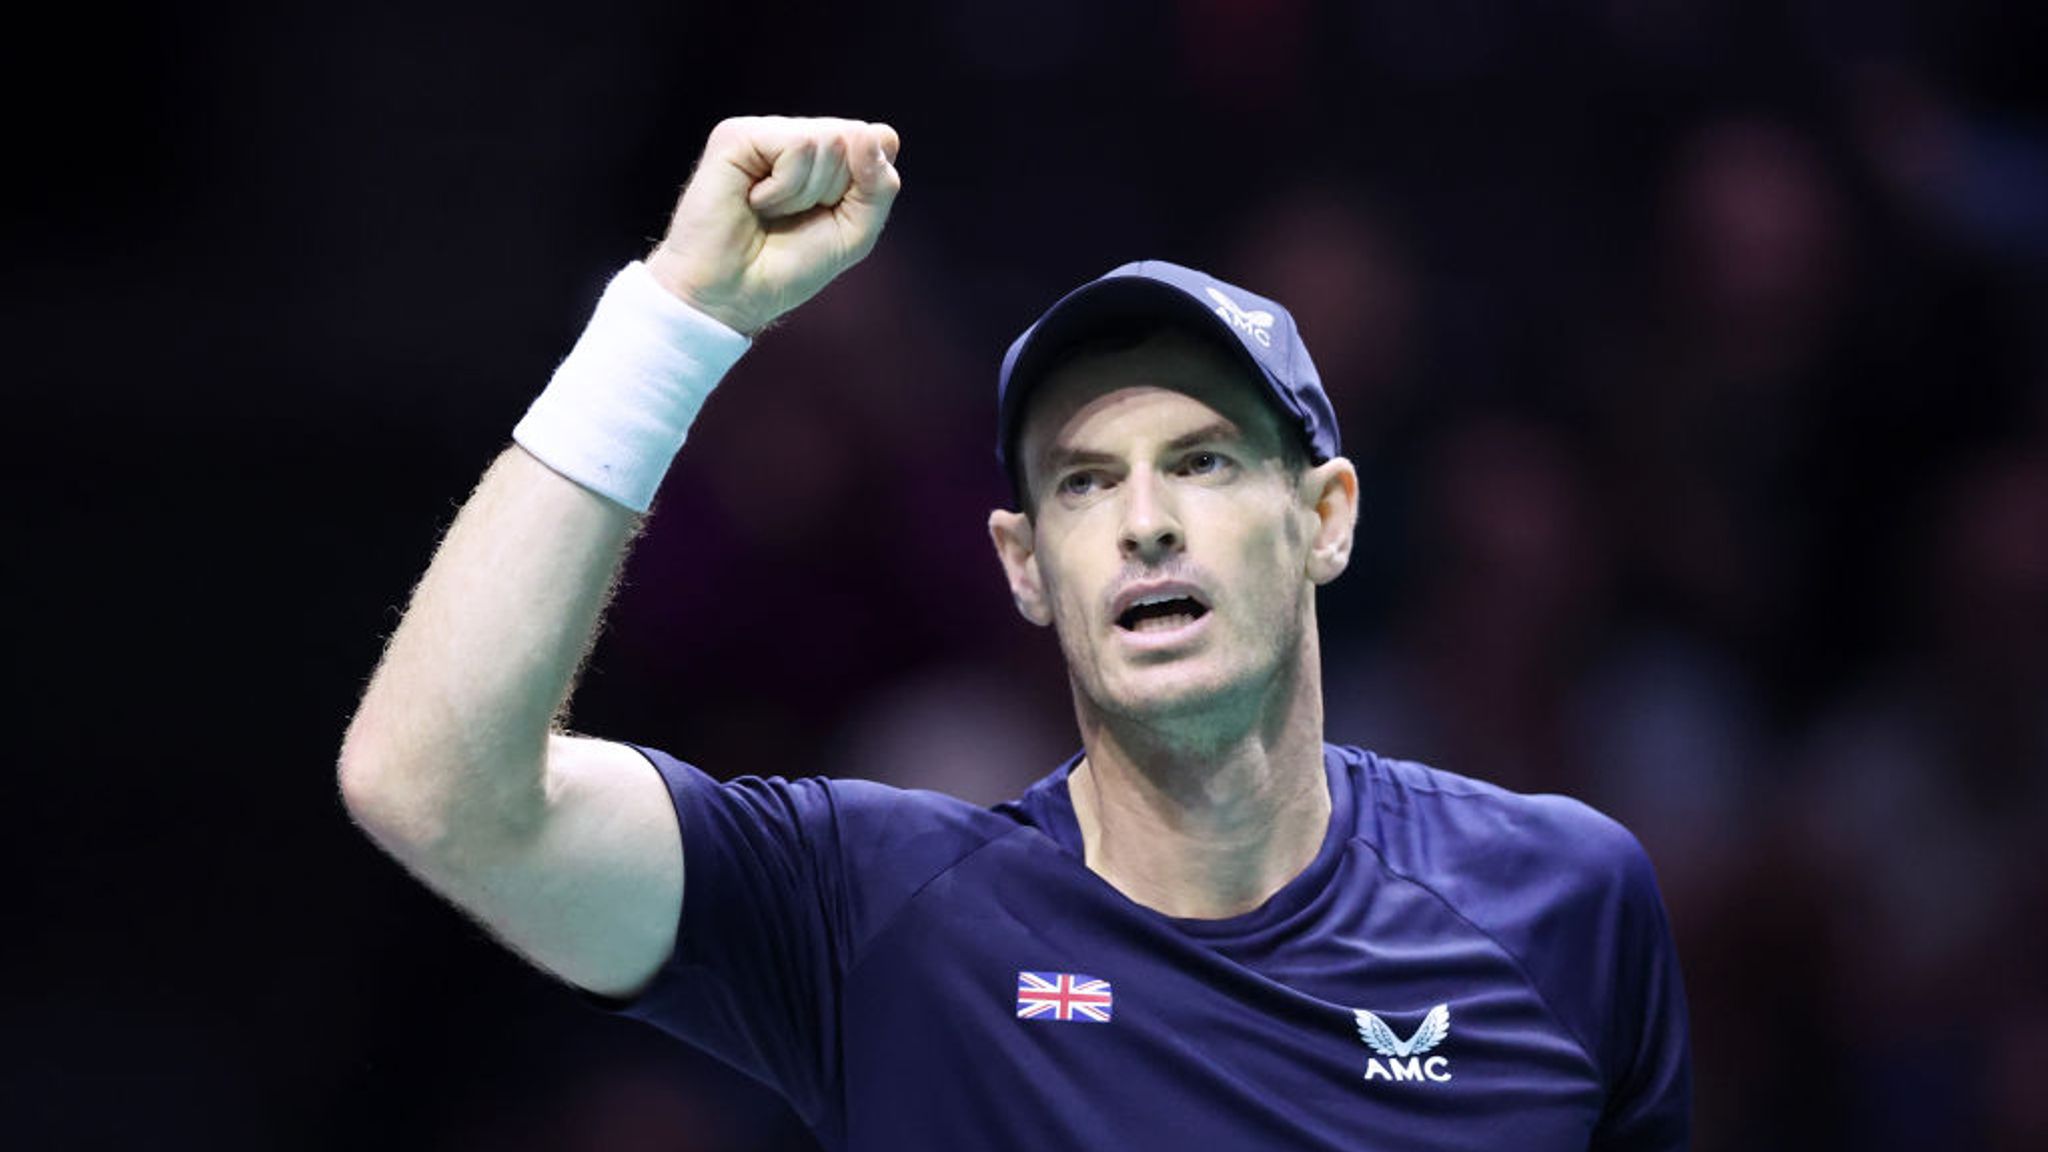 Great Britain beat France in the final group stage to claim their place in the Final eight in the Davis Cup